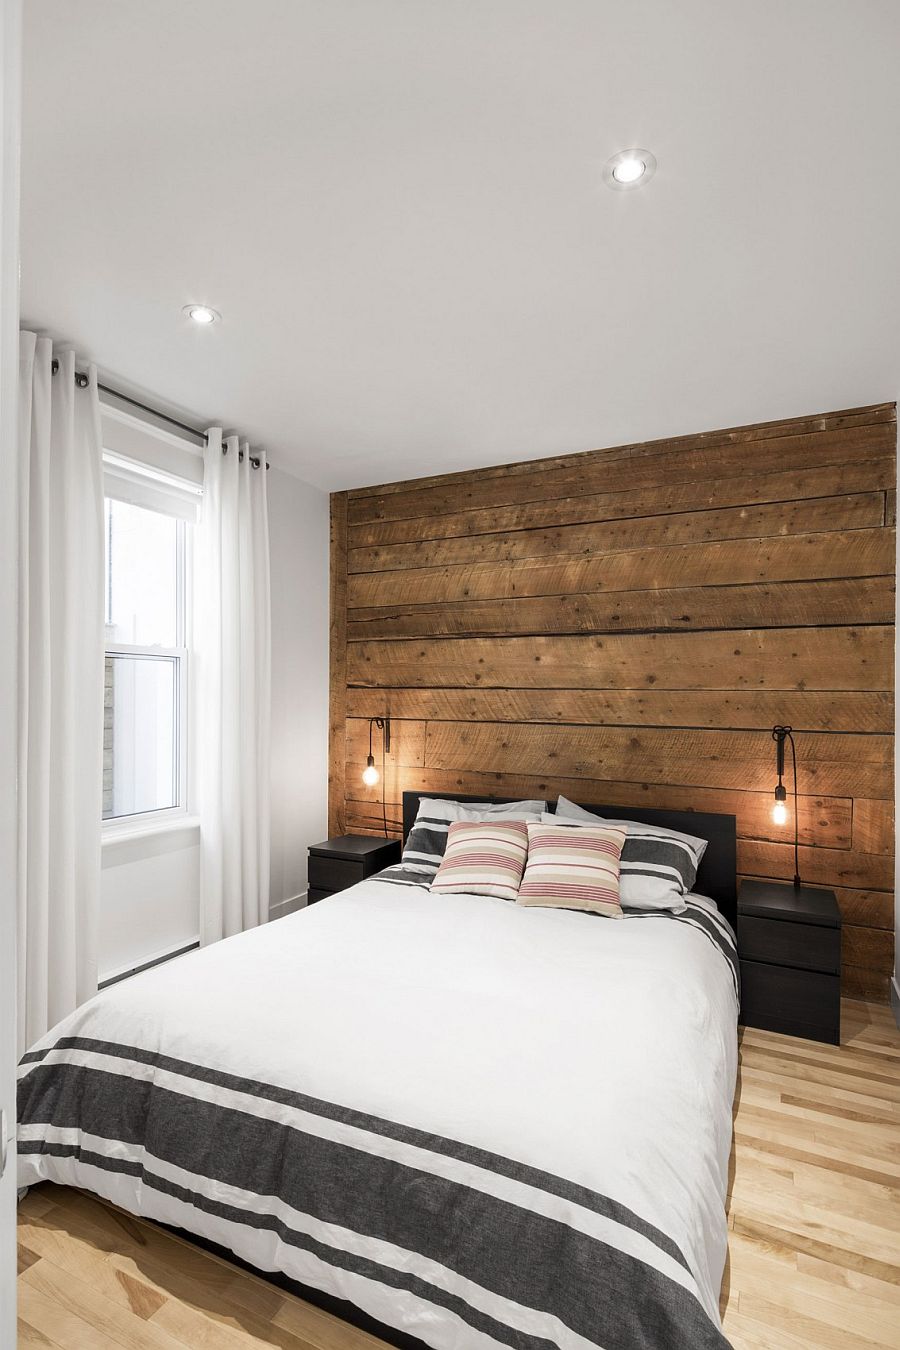 Wall of original wooden boards creates a lovely ambiance in the bedroom